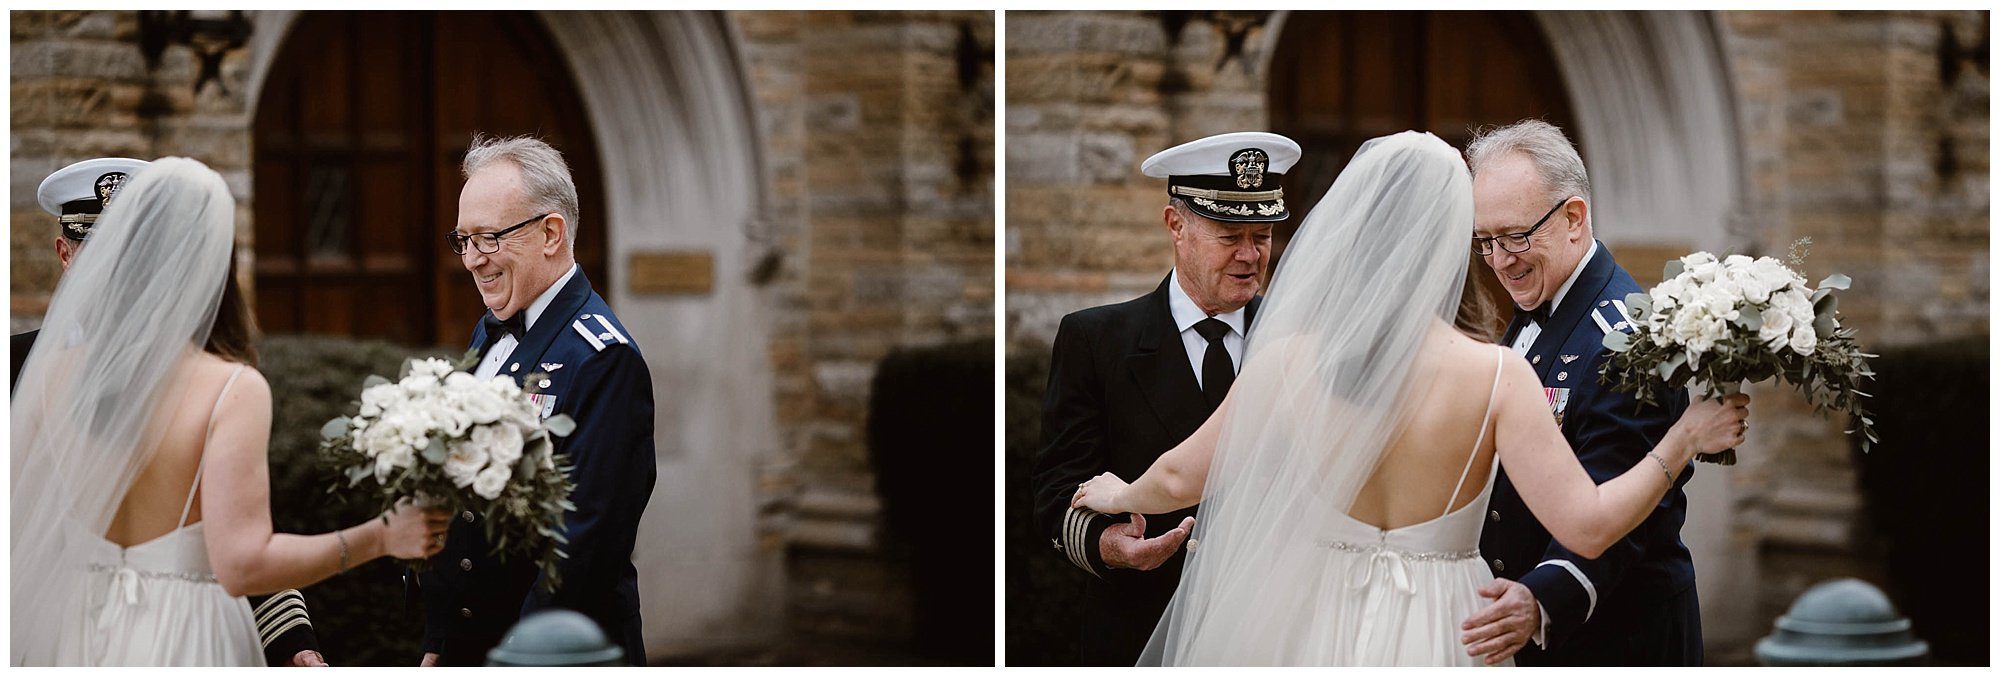 first look photos at church wedding Knoxville